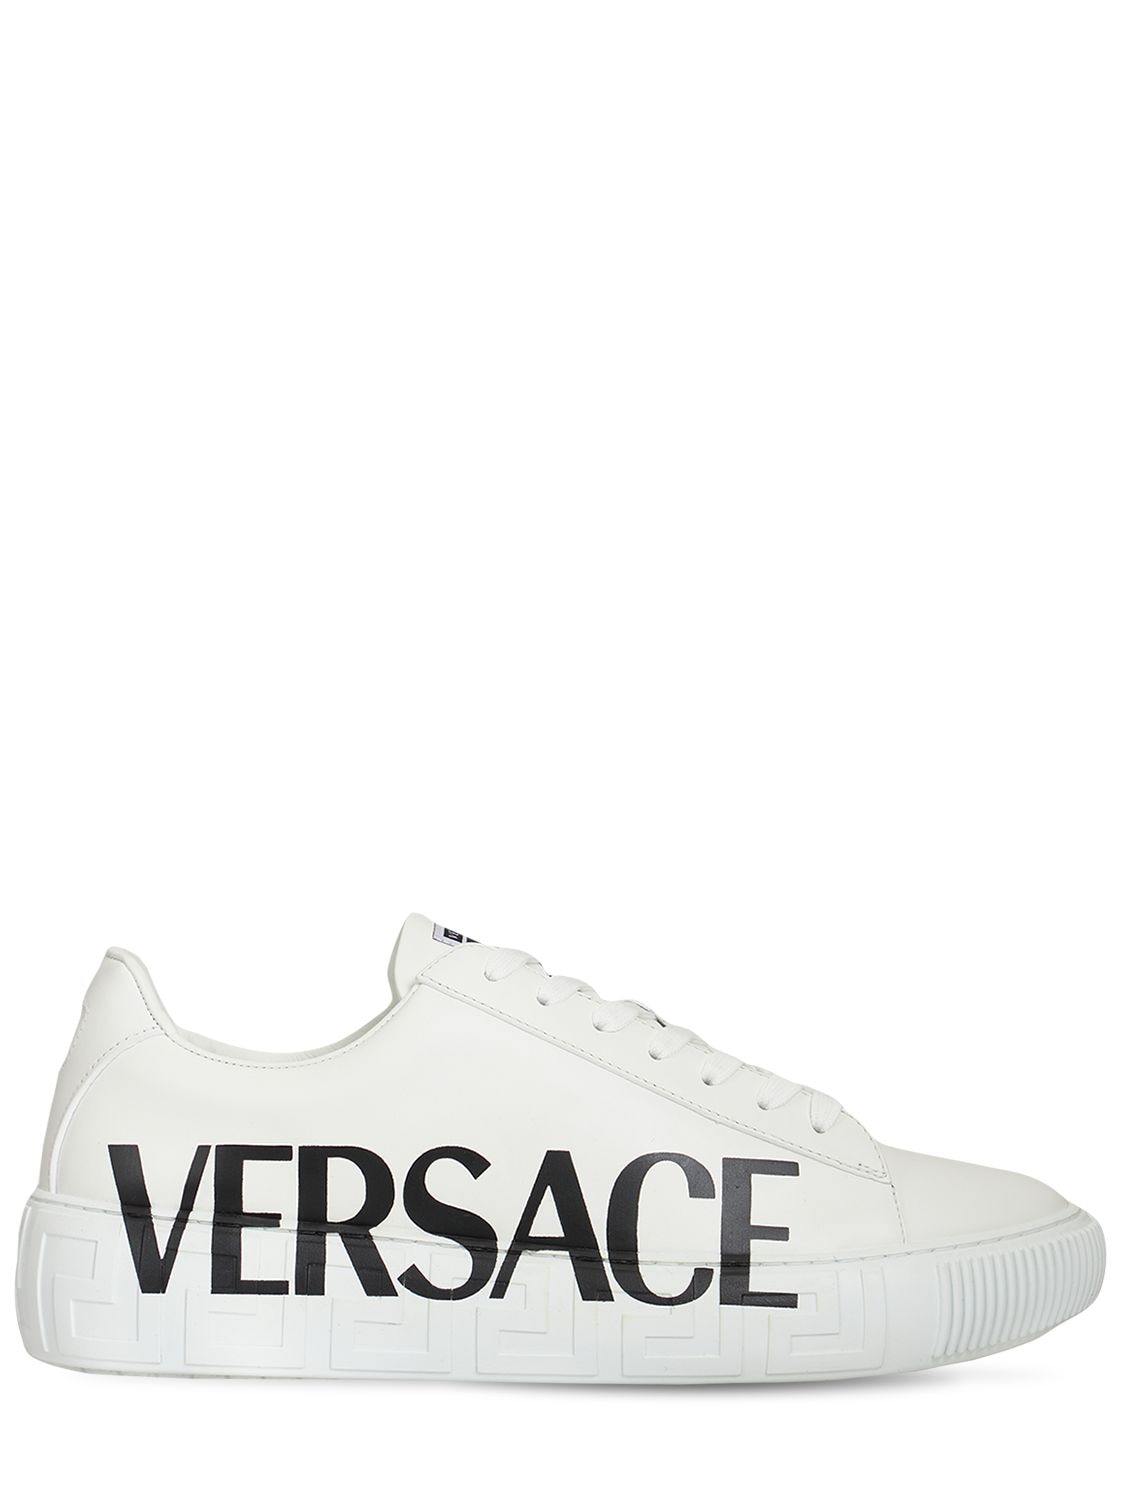 Logo Print Leather Low Top Sneakers